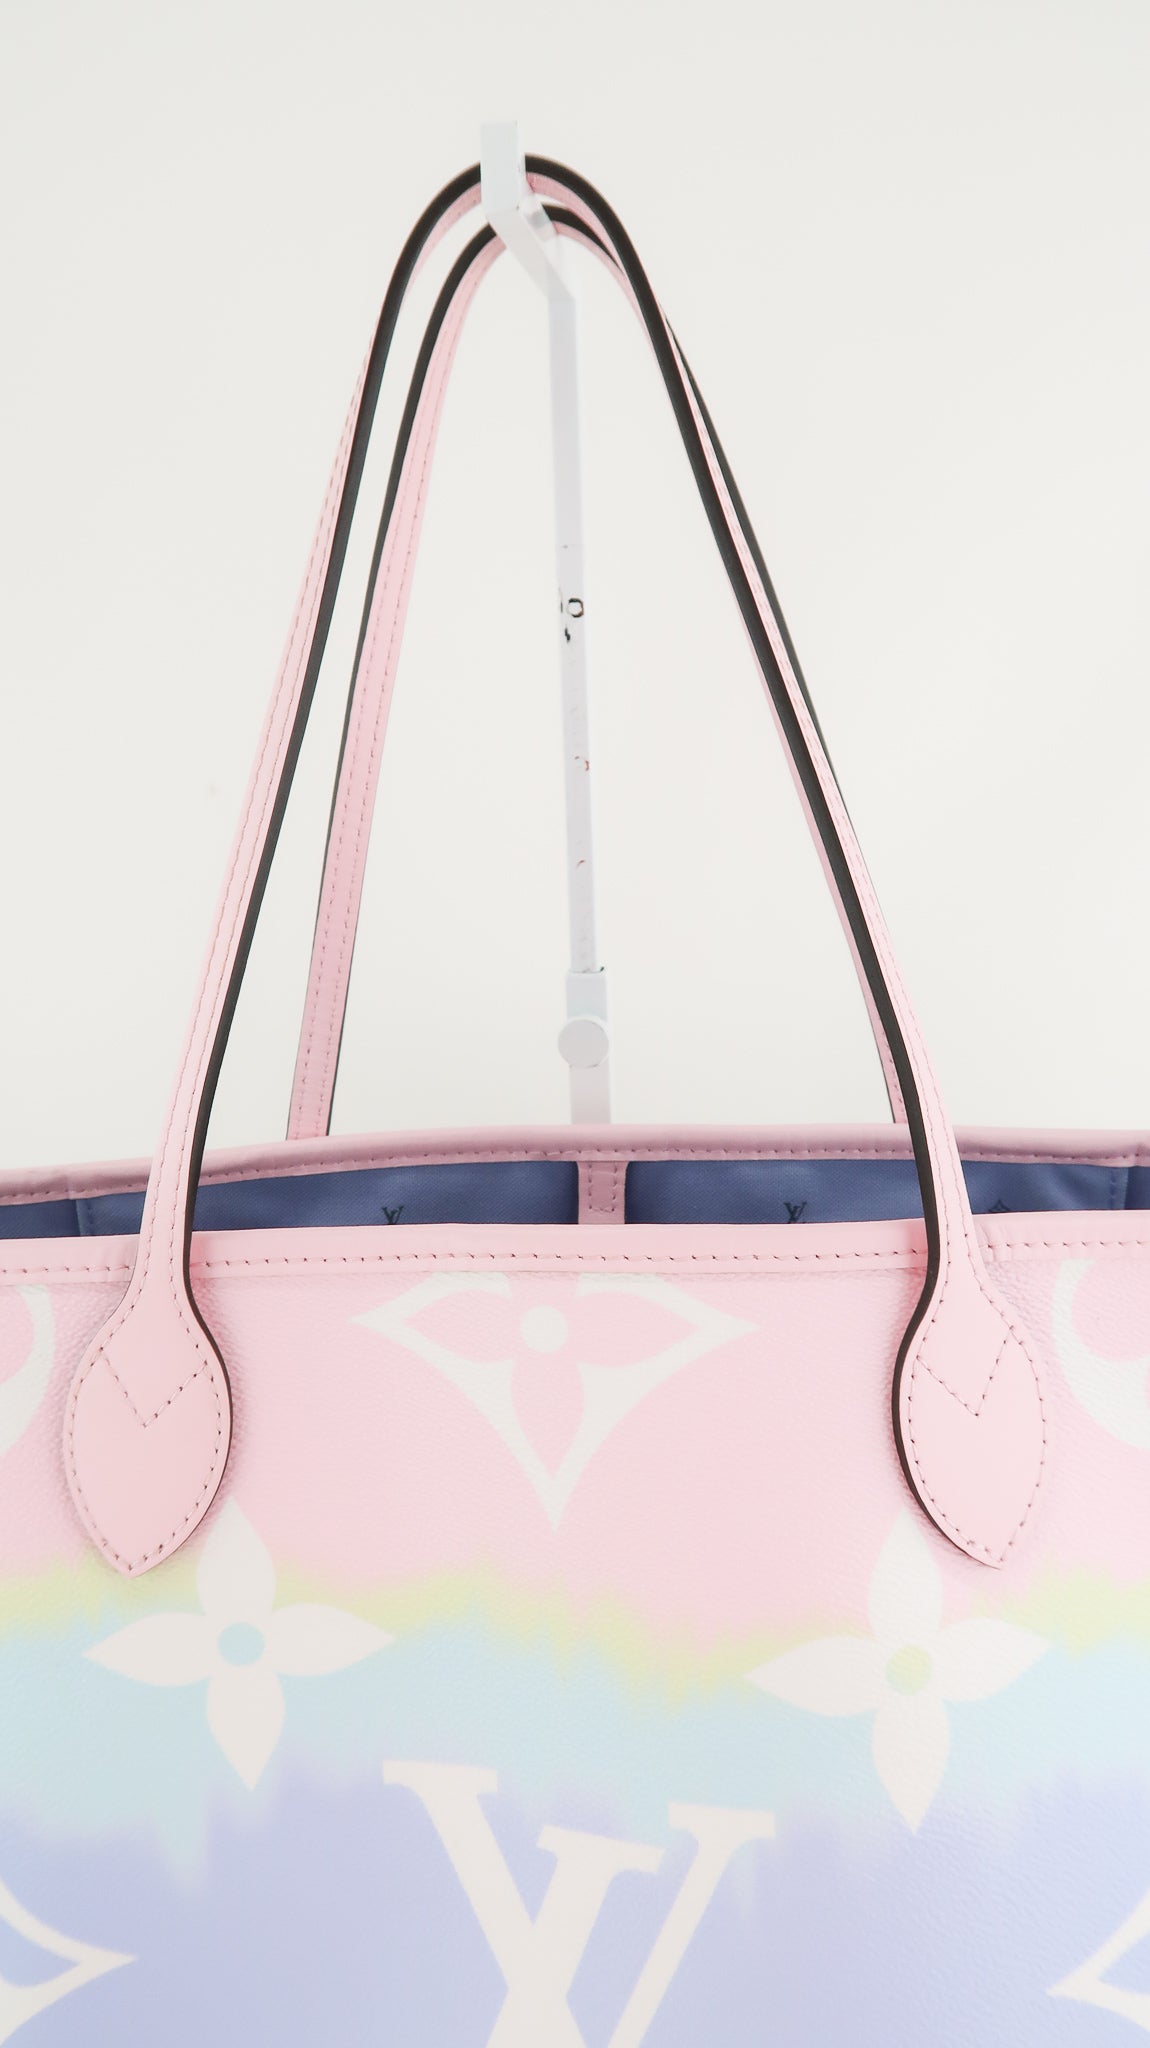 Louis+Vuitton+Neverfull+Tote+MM+Pastel+Pink+Escale+Monogram+Giant+Canvas+Limited+Edition  for sale online